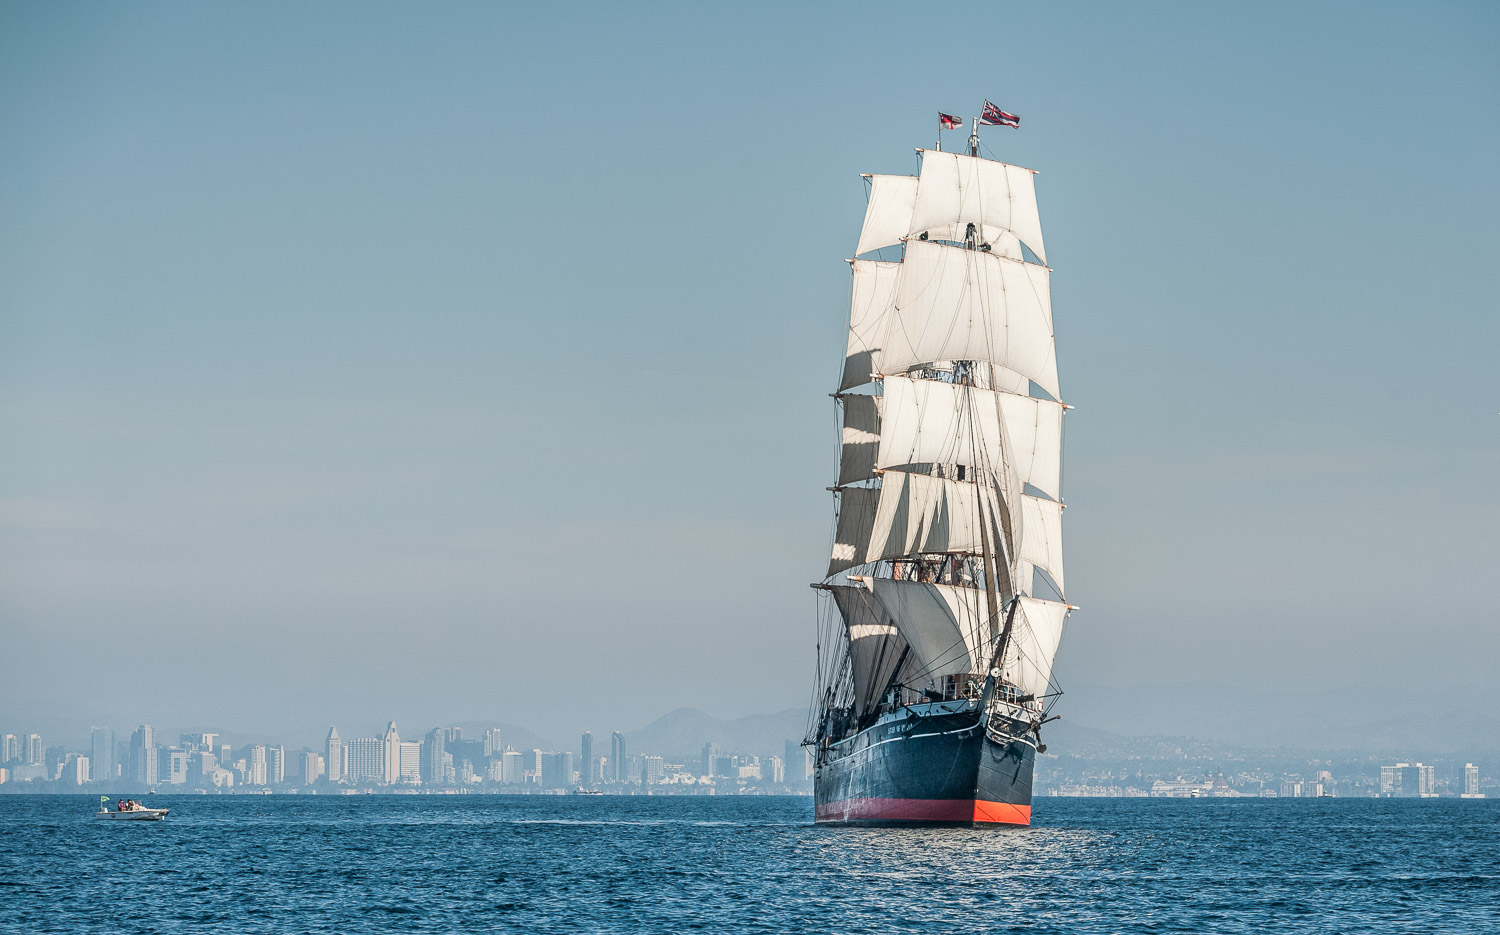 Star Of India Sails - Maritime Museum of San Diego